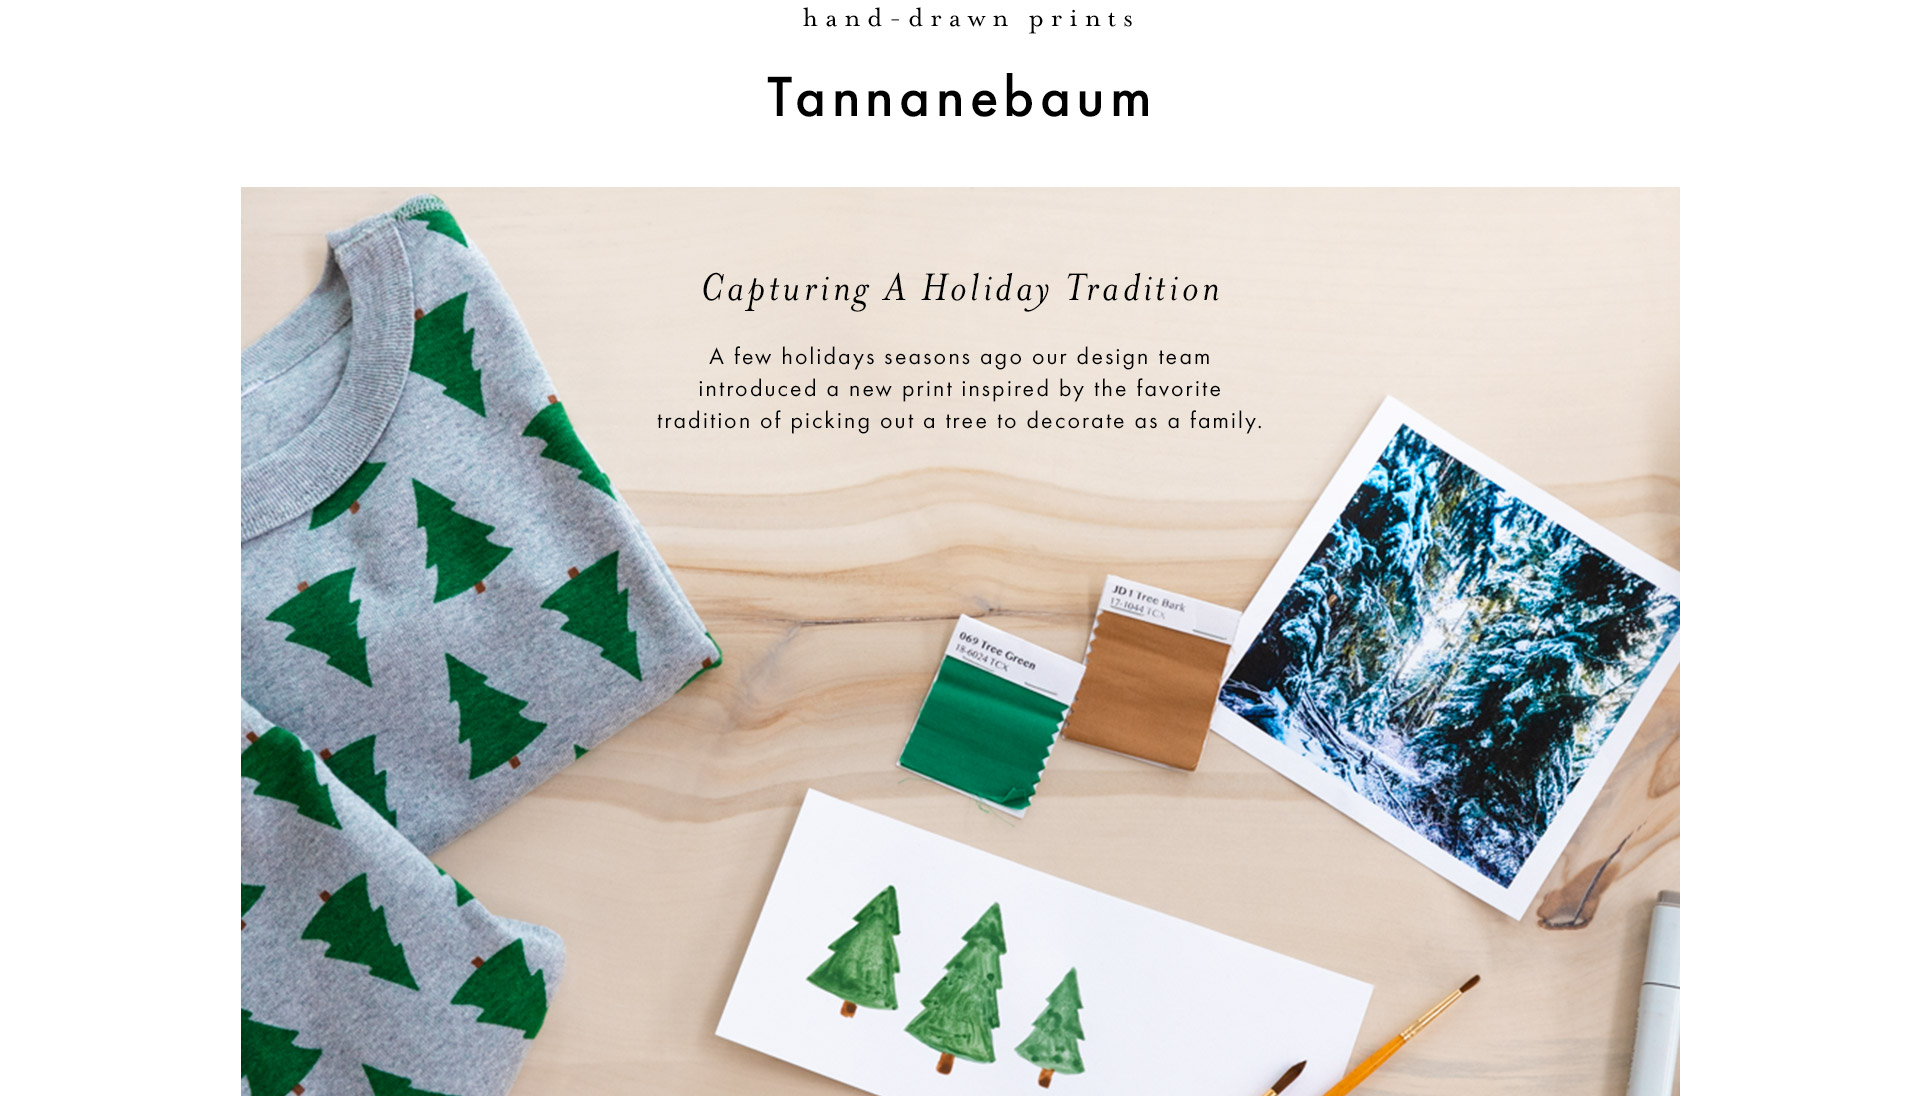 Inspiration for how our creators made our classic tannenbuam tree print